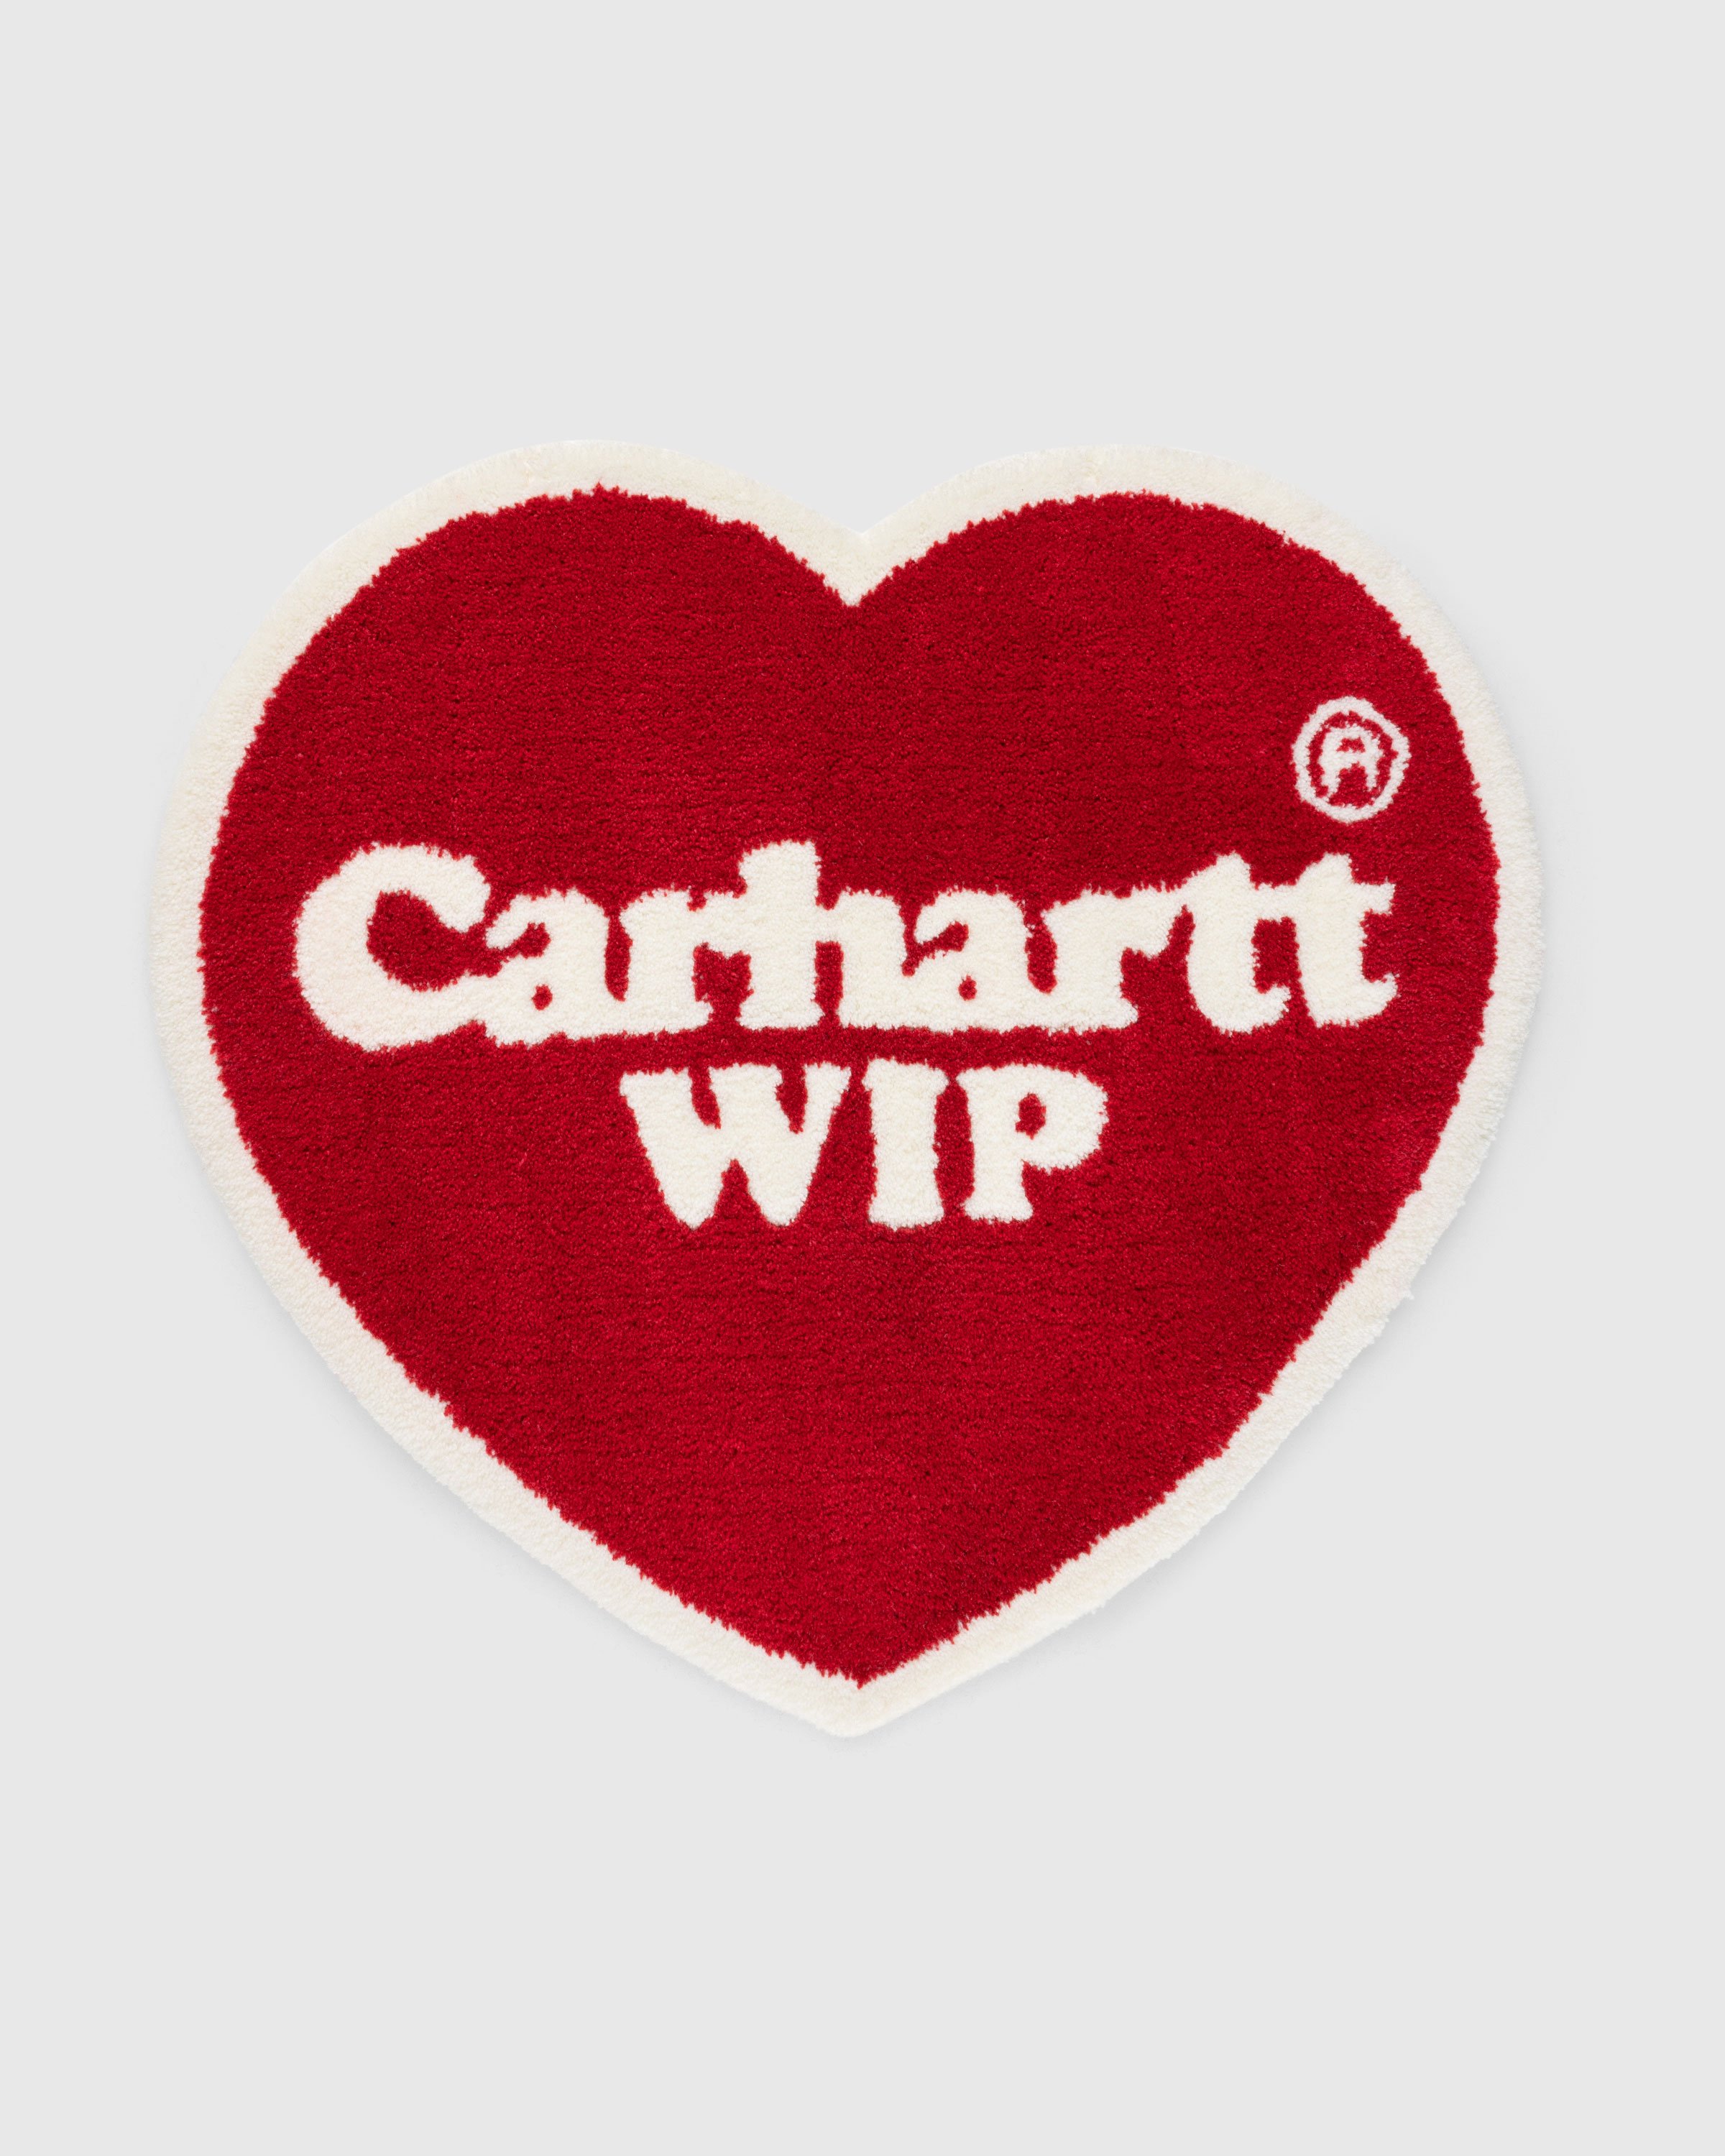 Carhartt WIP - Heart Rug Red - Lifestyle - Red - Image 1